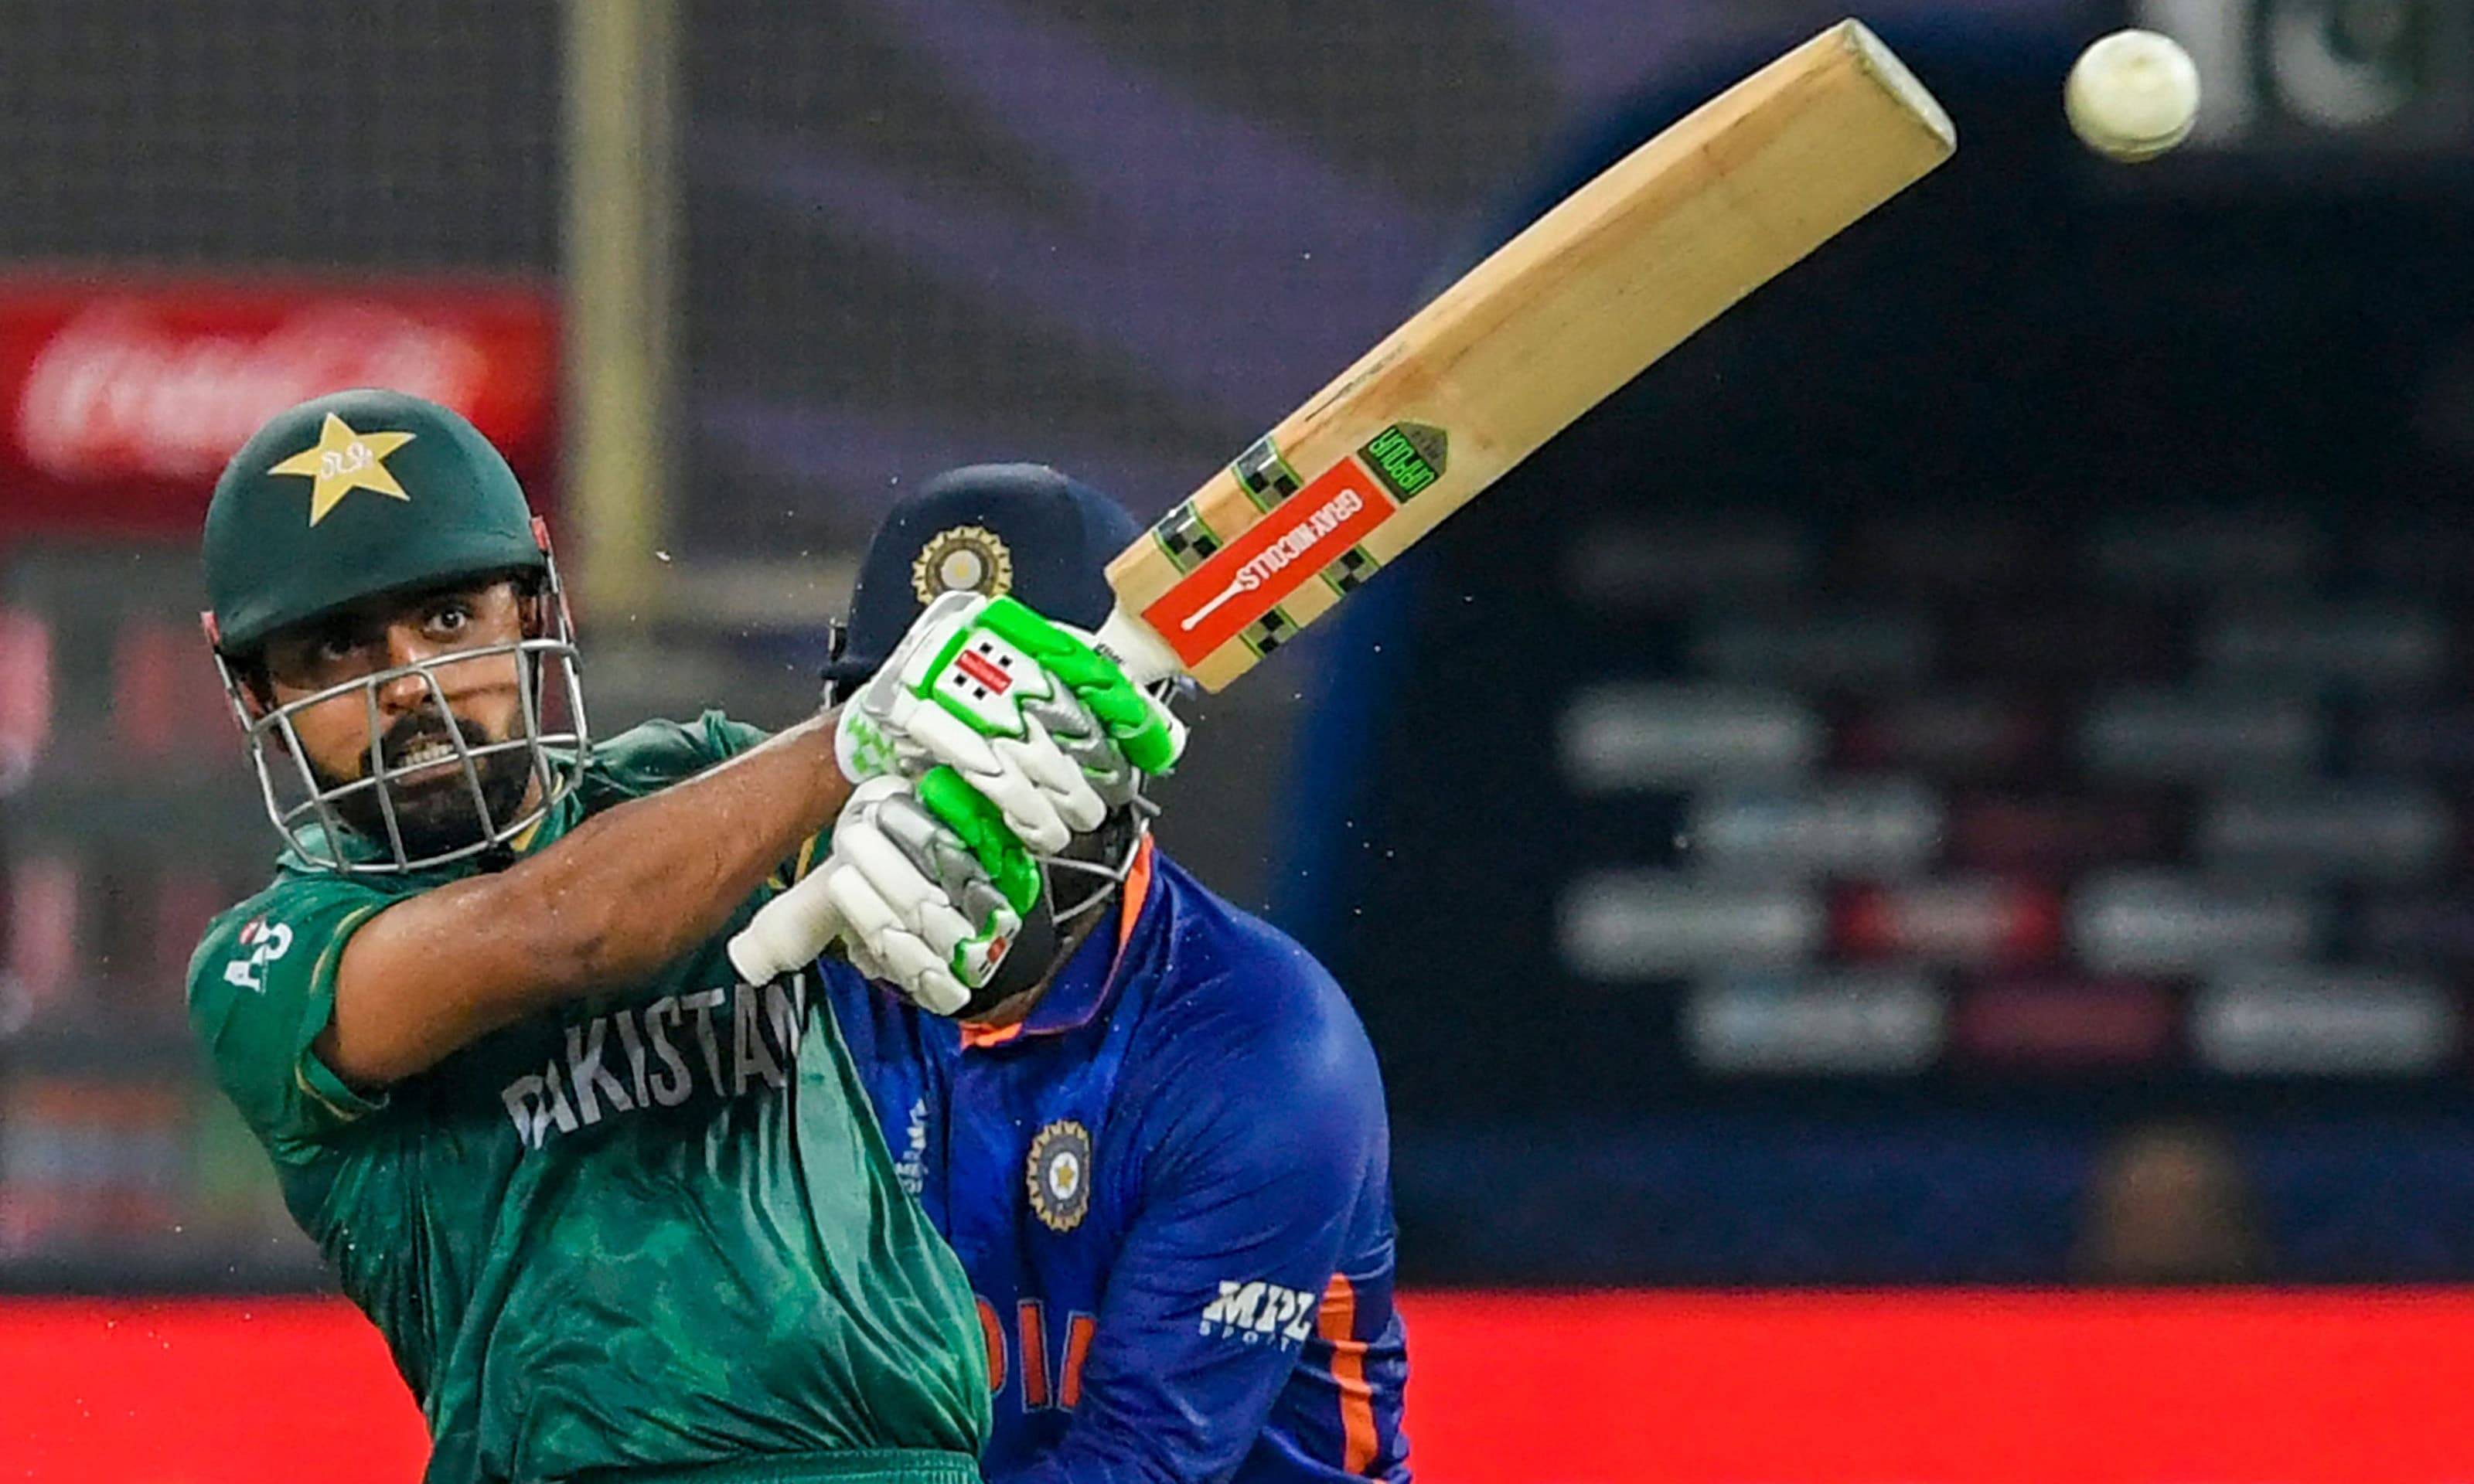 IND vs PAK: Pakistan captain Babar Azam delivers a MOTIVATING SPEECH ahead of India game, says ‘play with same body language like we played in last World Cup’